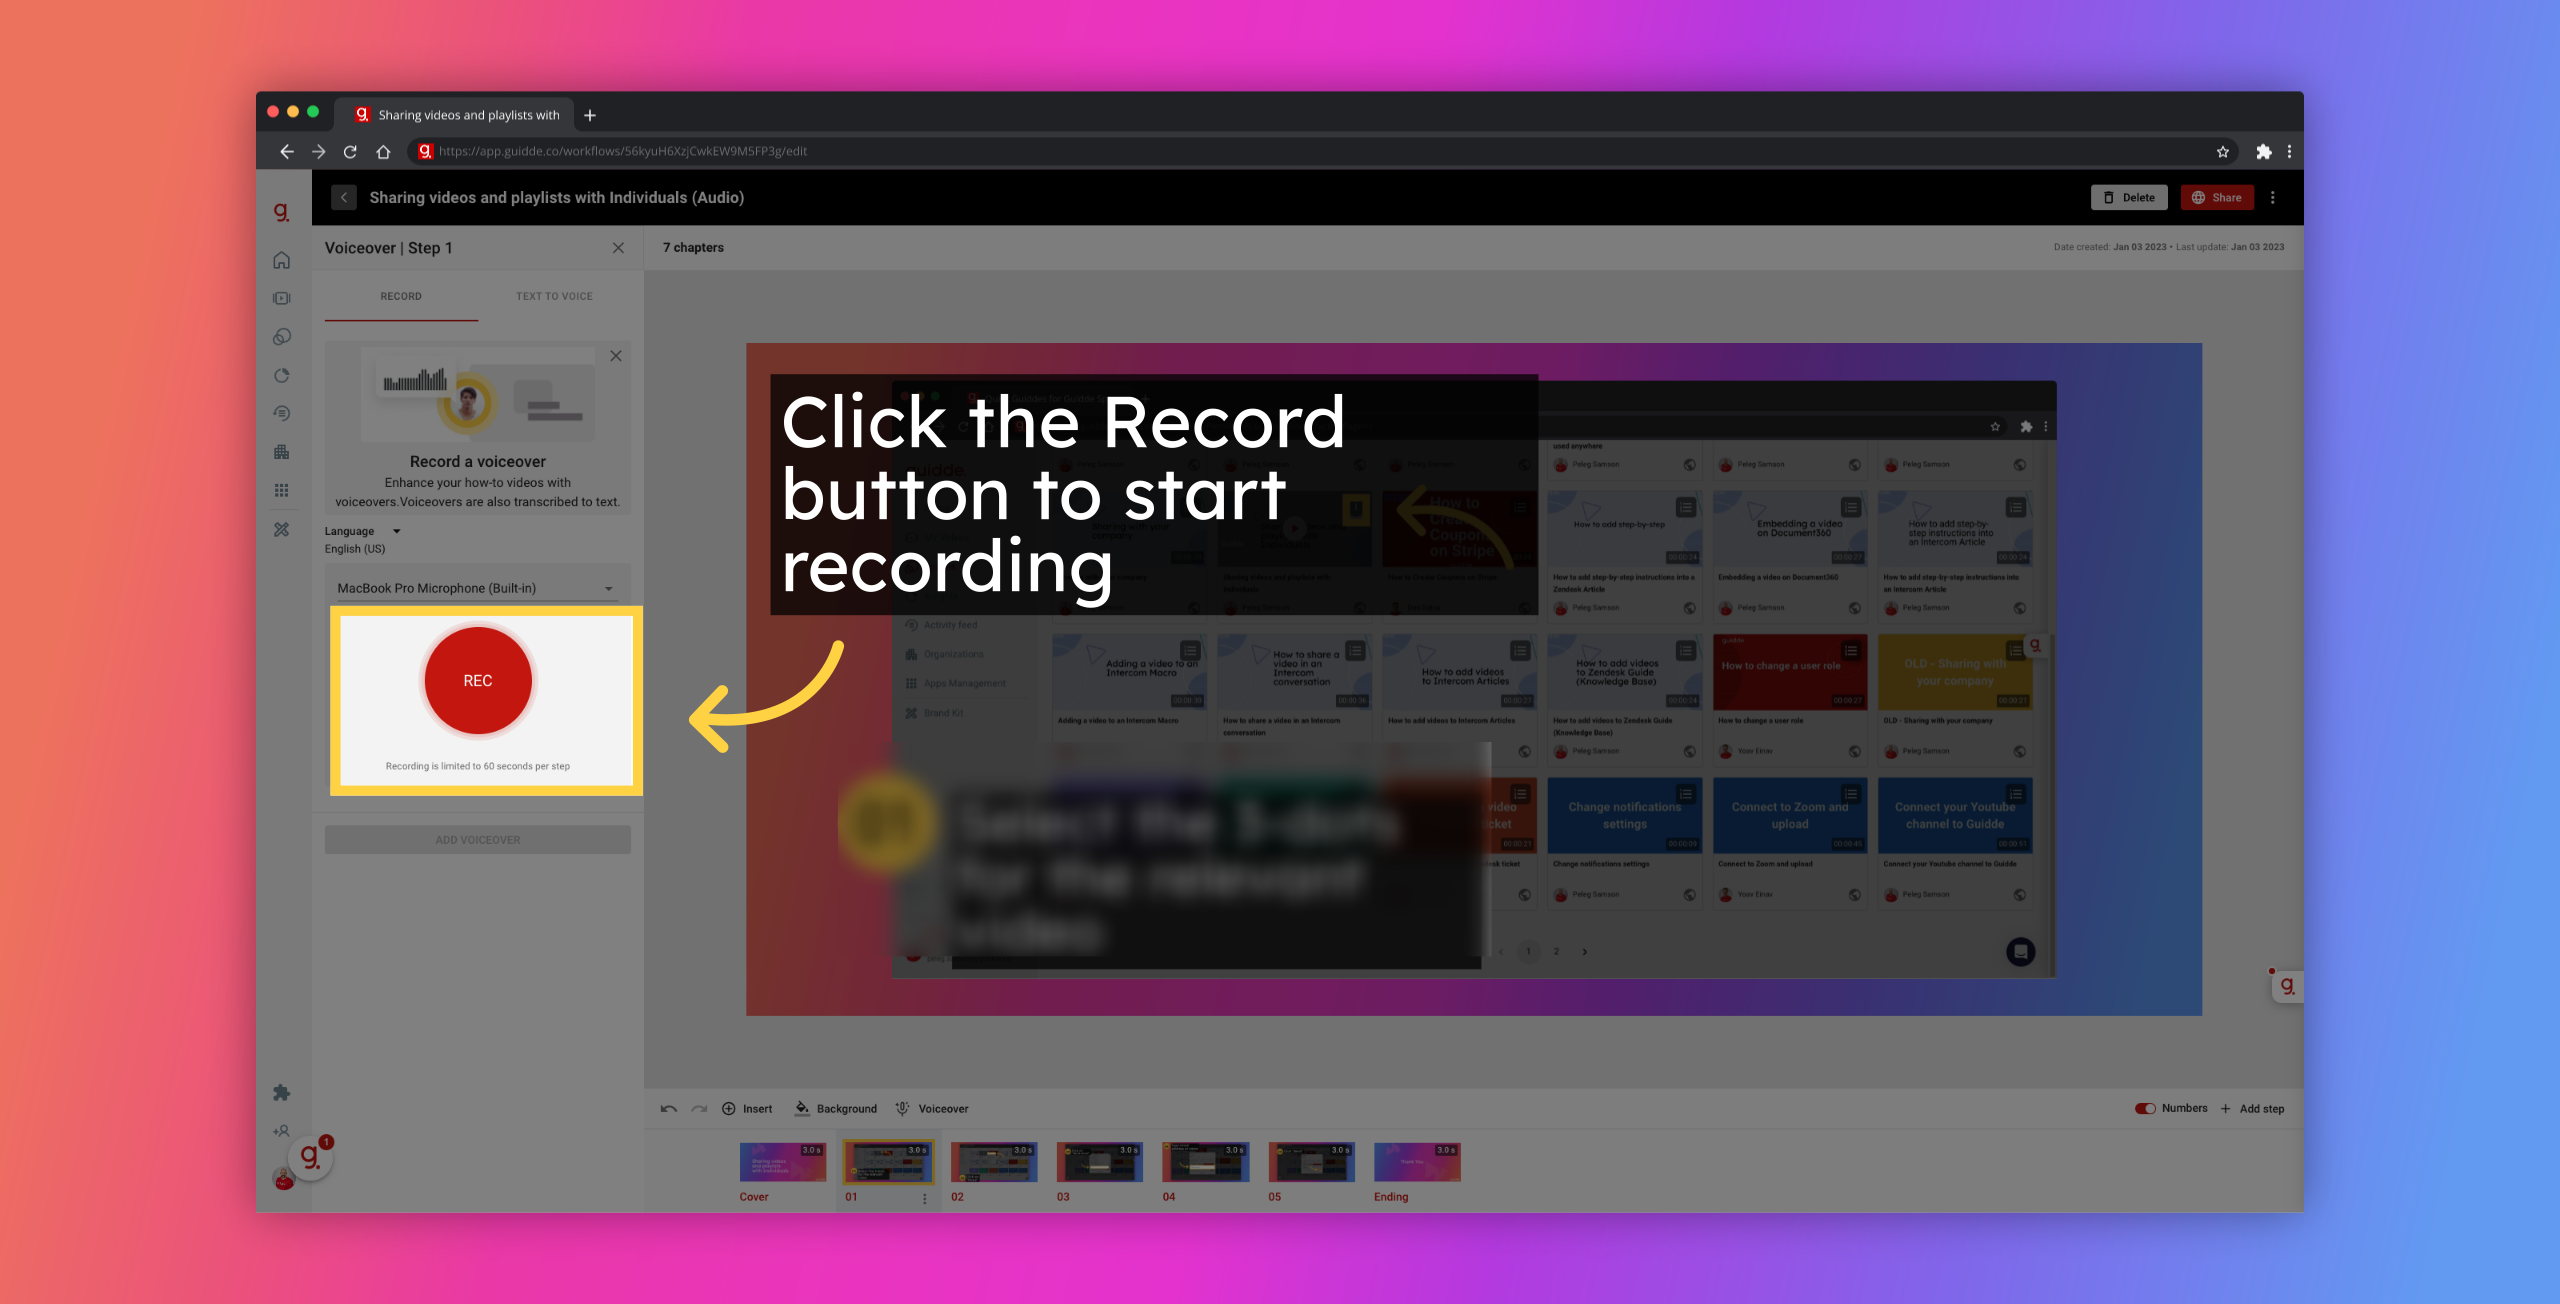 Click the Record button to start recording